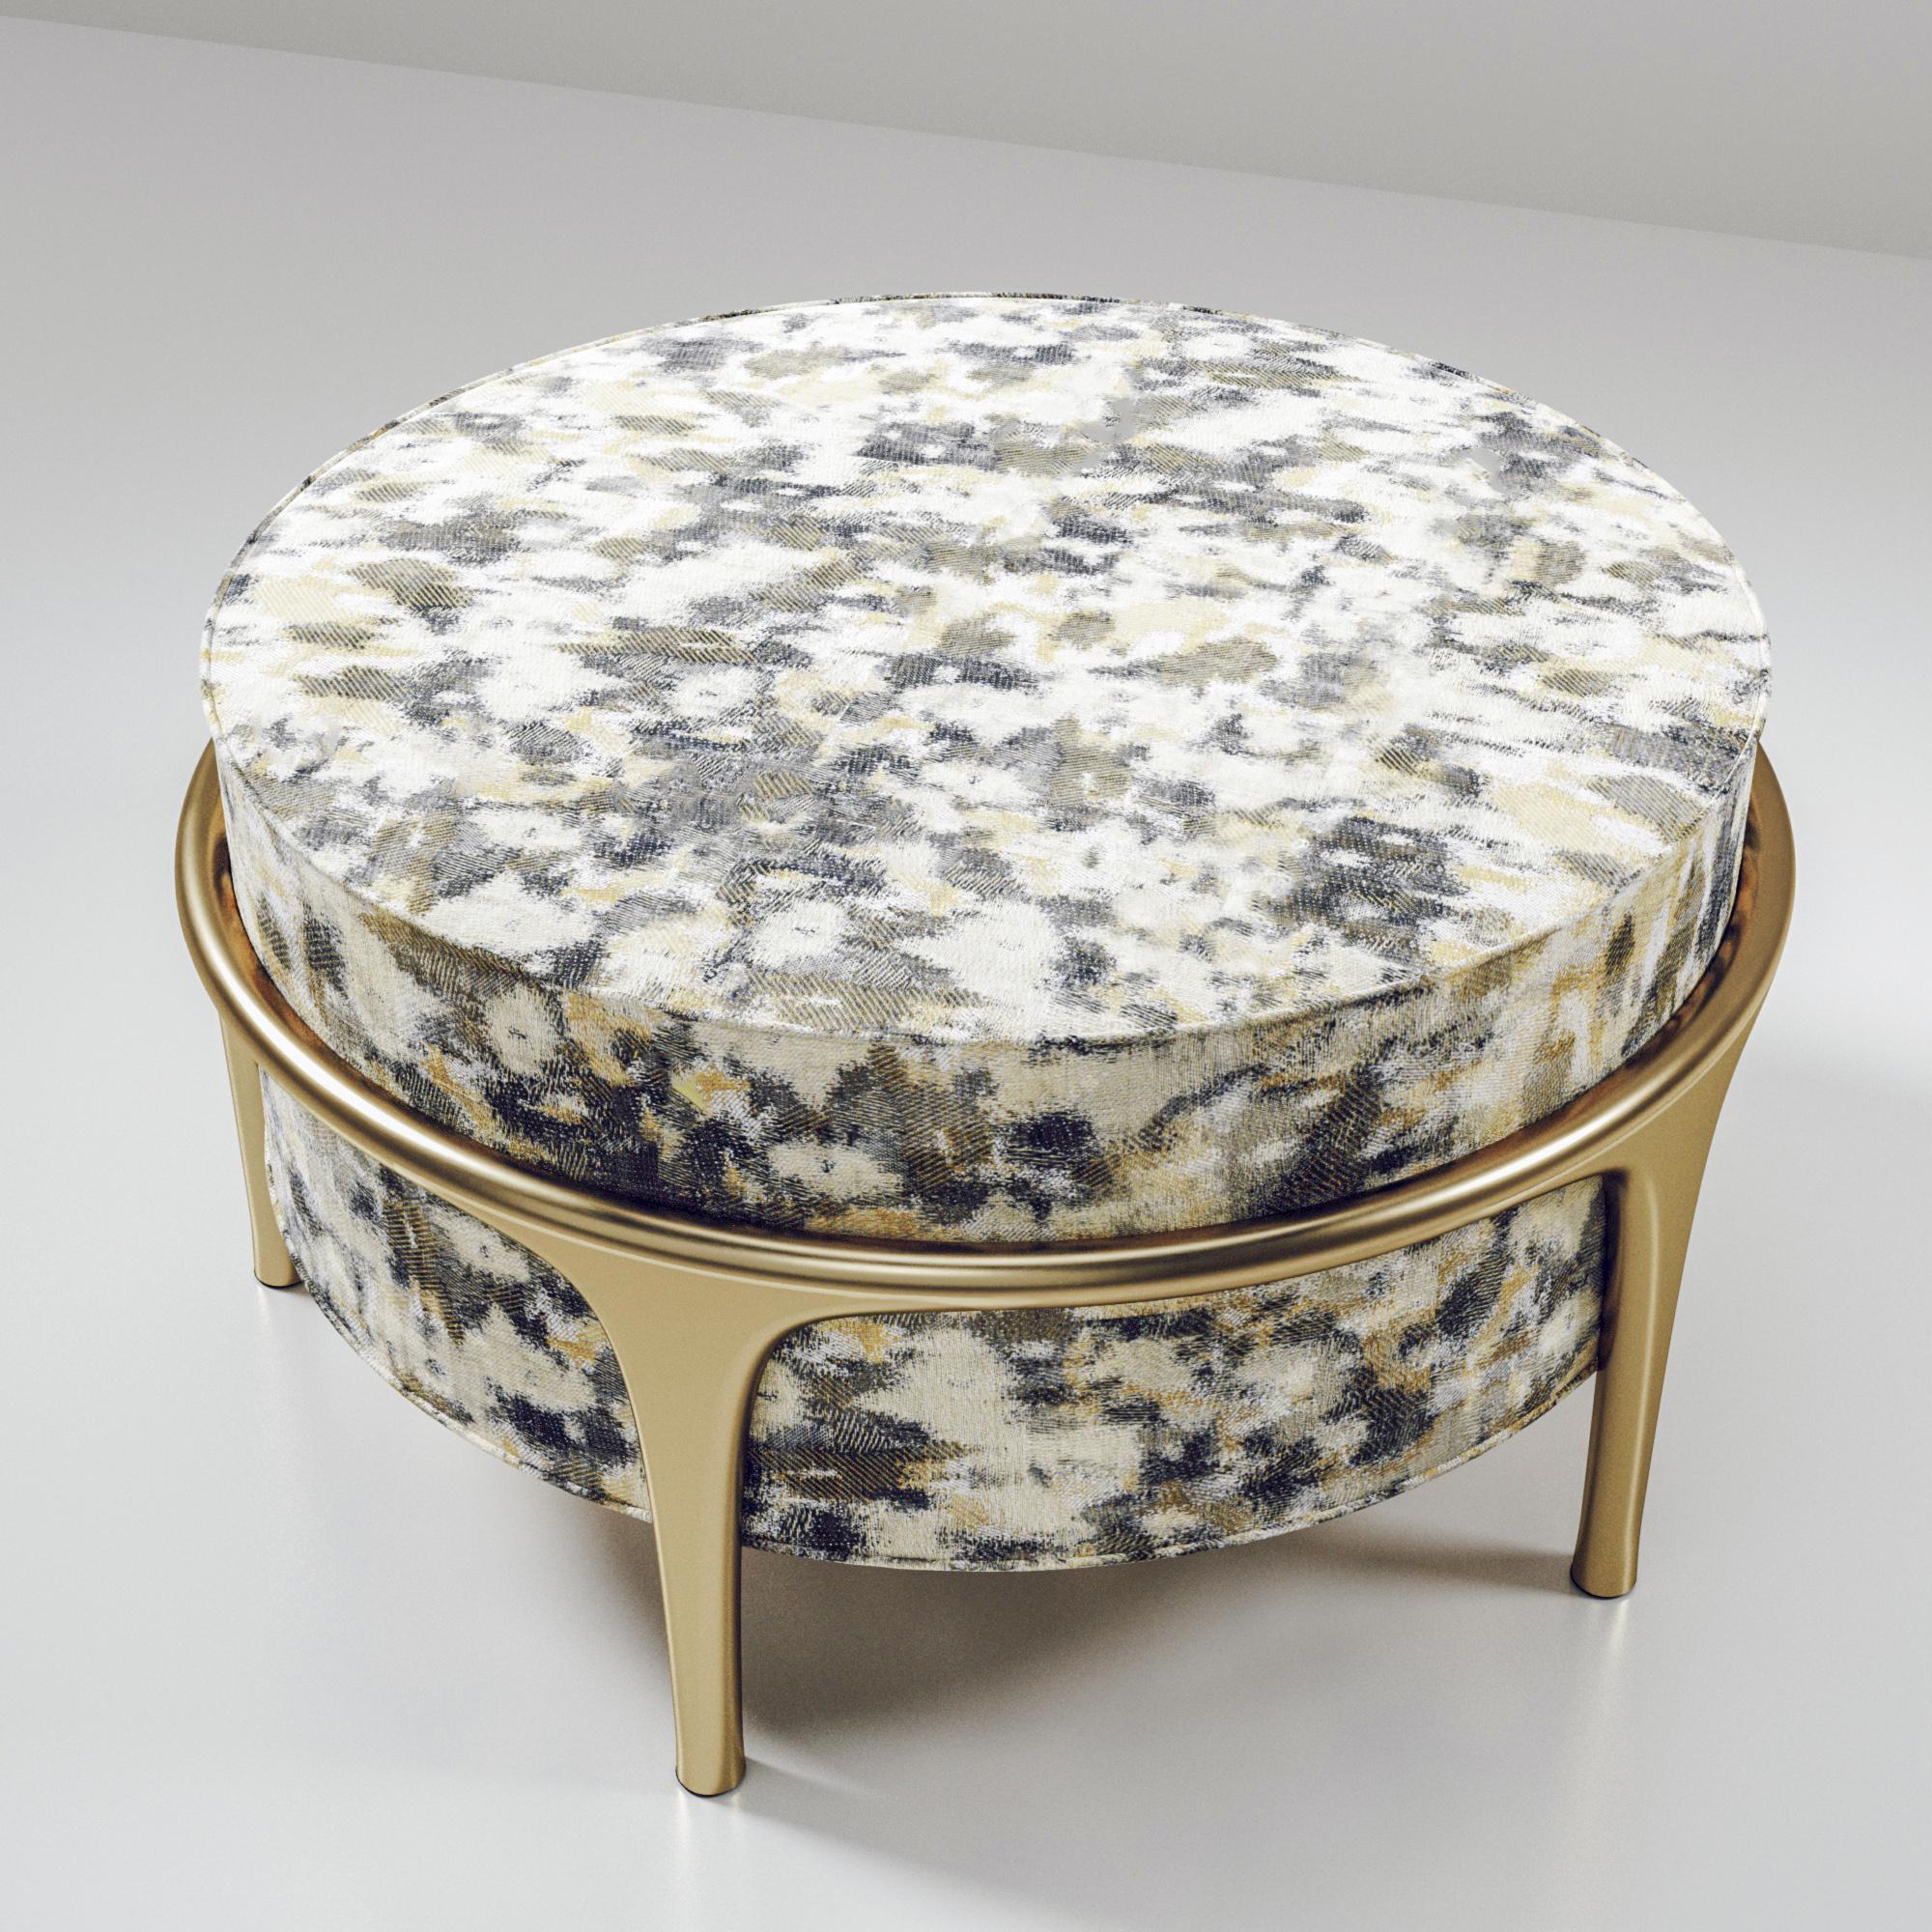 The Ramo ottoman and stool by R & Y Augousti is an elegant and versatile piece. The upholstered pieces provide comfort while retaining a unique aesthetic with the bronze-patina brass frame and details. This listing is priced for COM supply by client